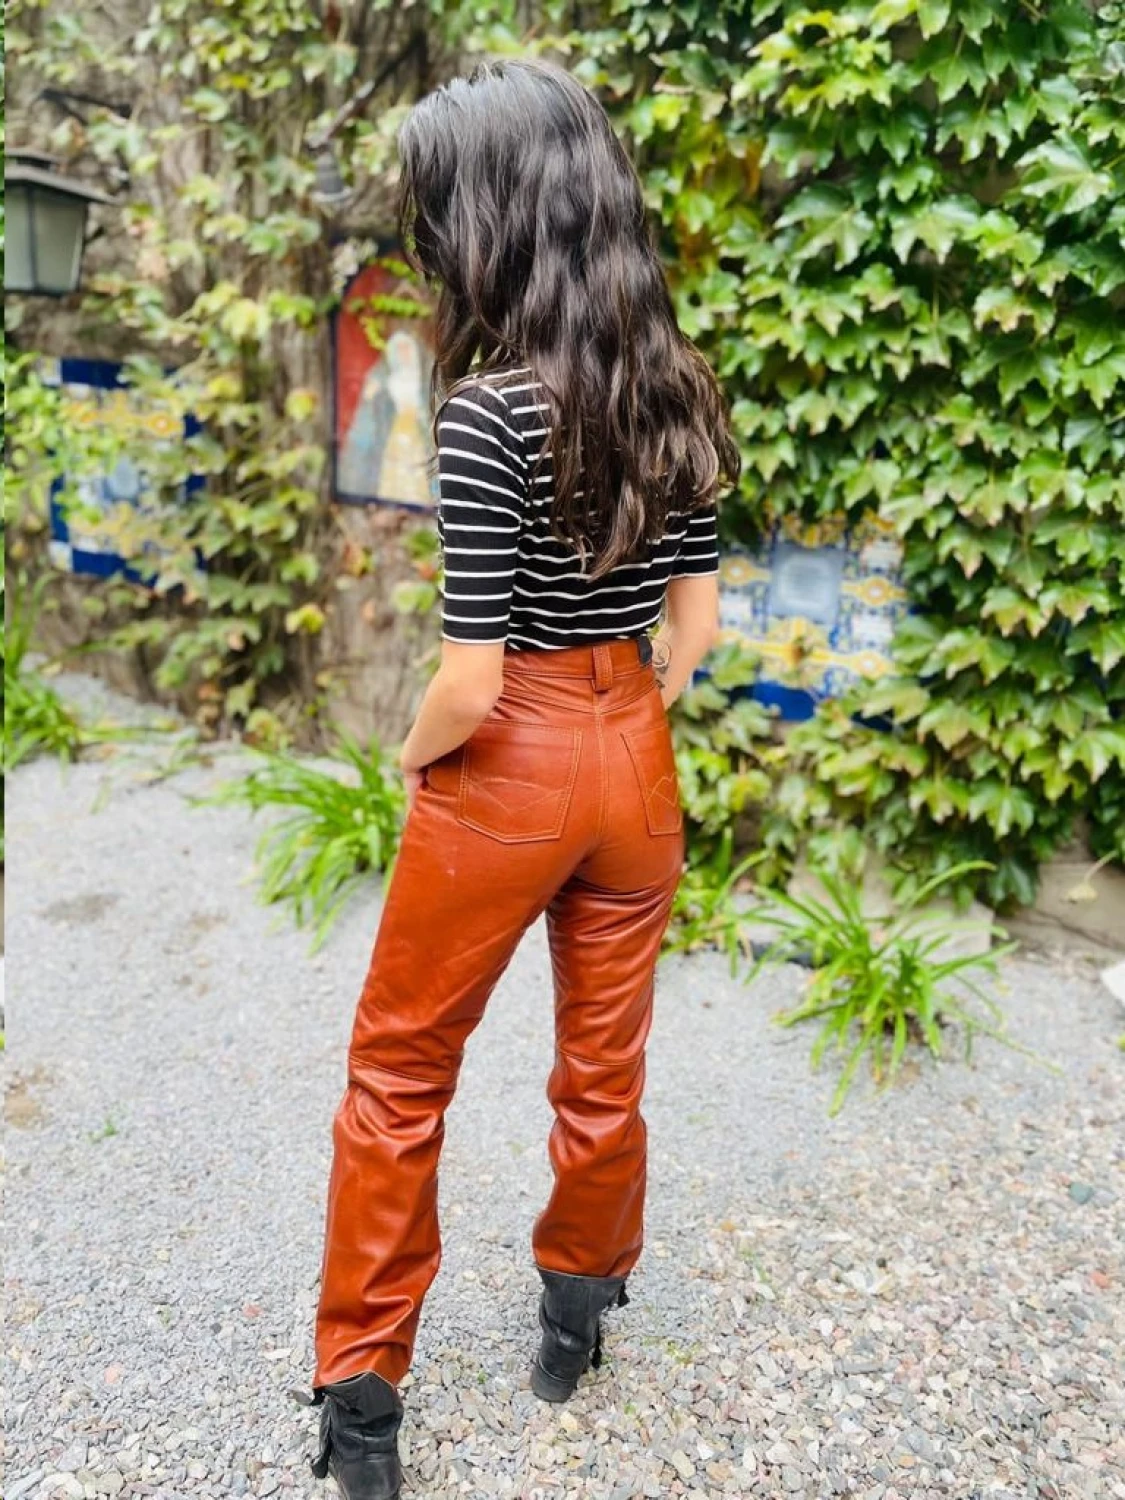 Leather Jeans Crawford cognac 34